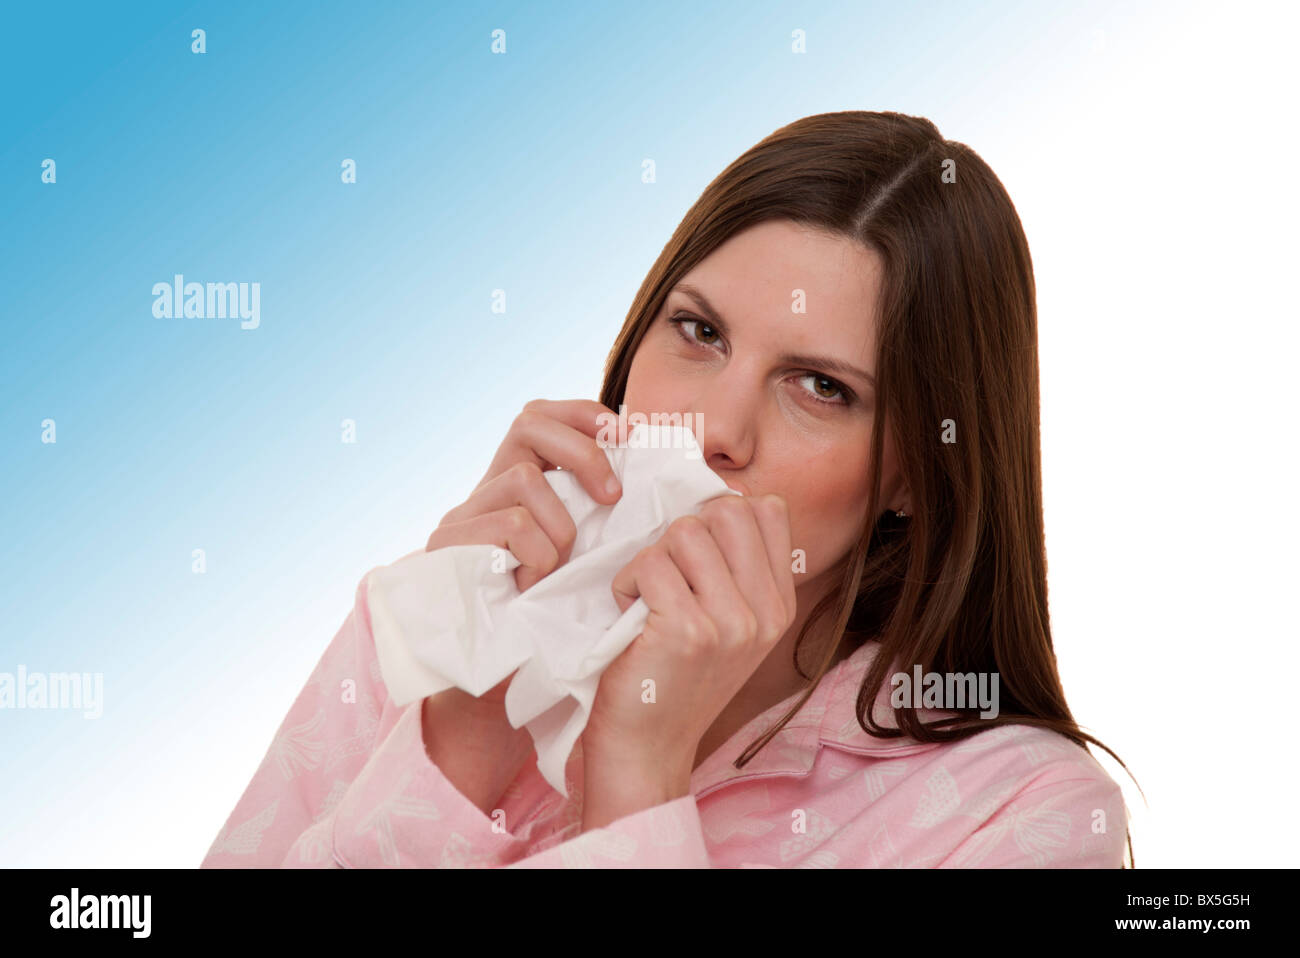 Brunette woman blowing her nose wearing pajamas Banque D'Images